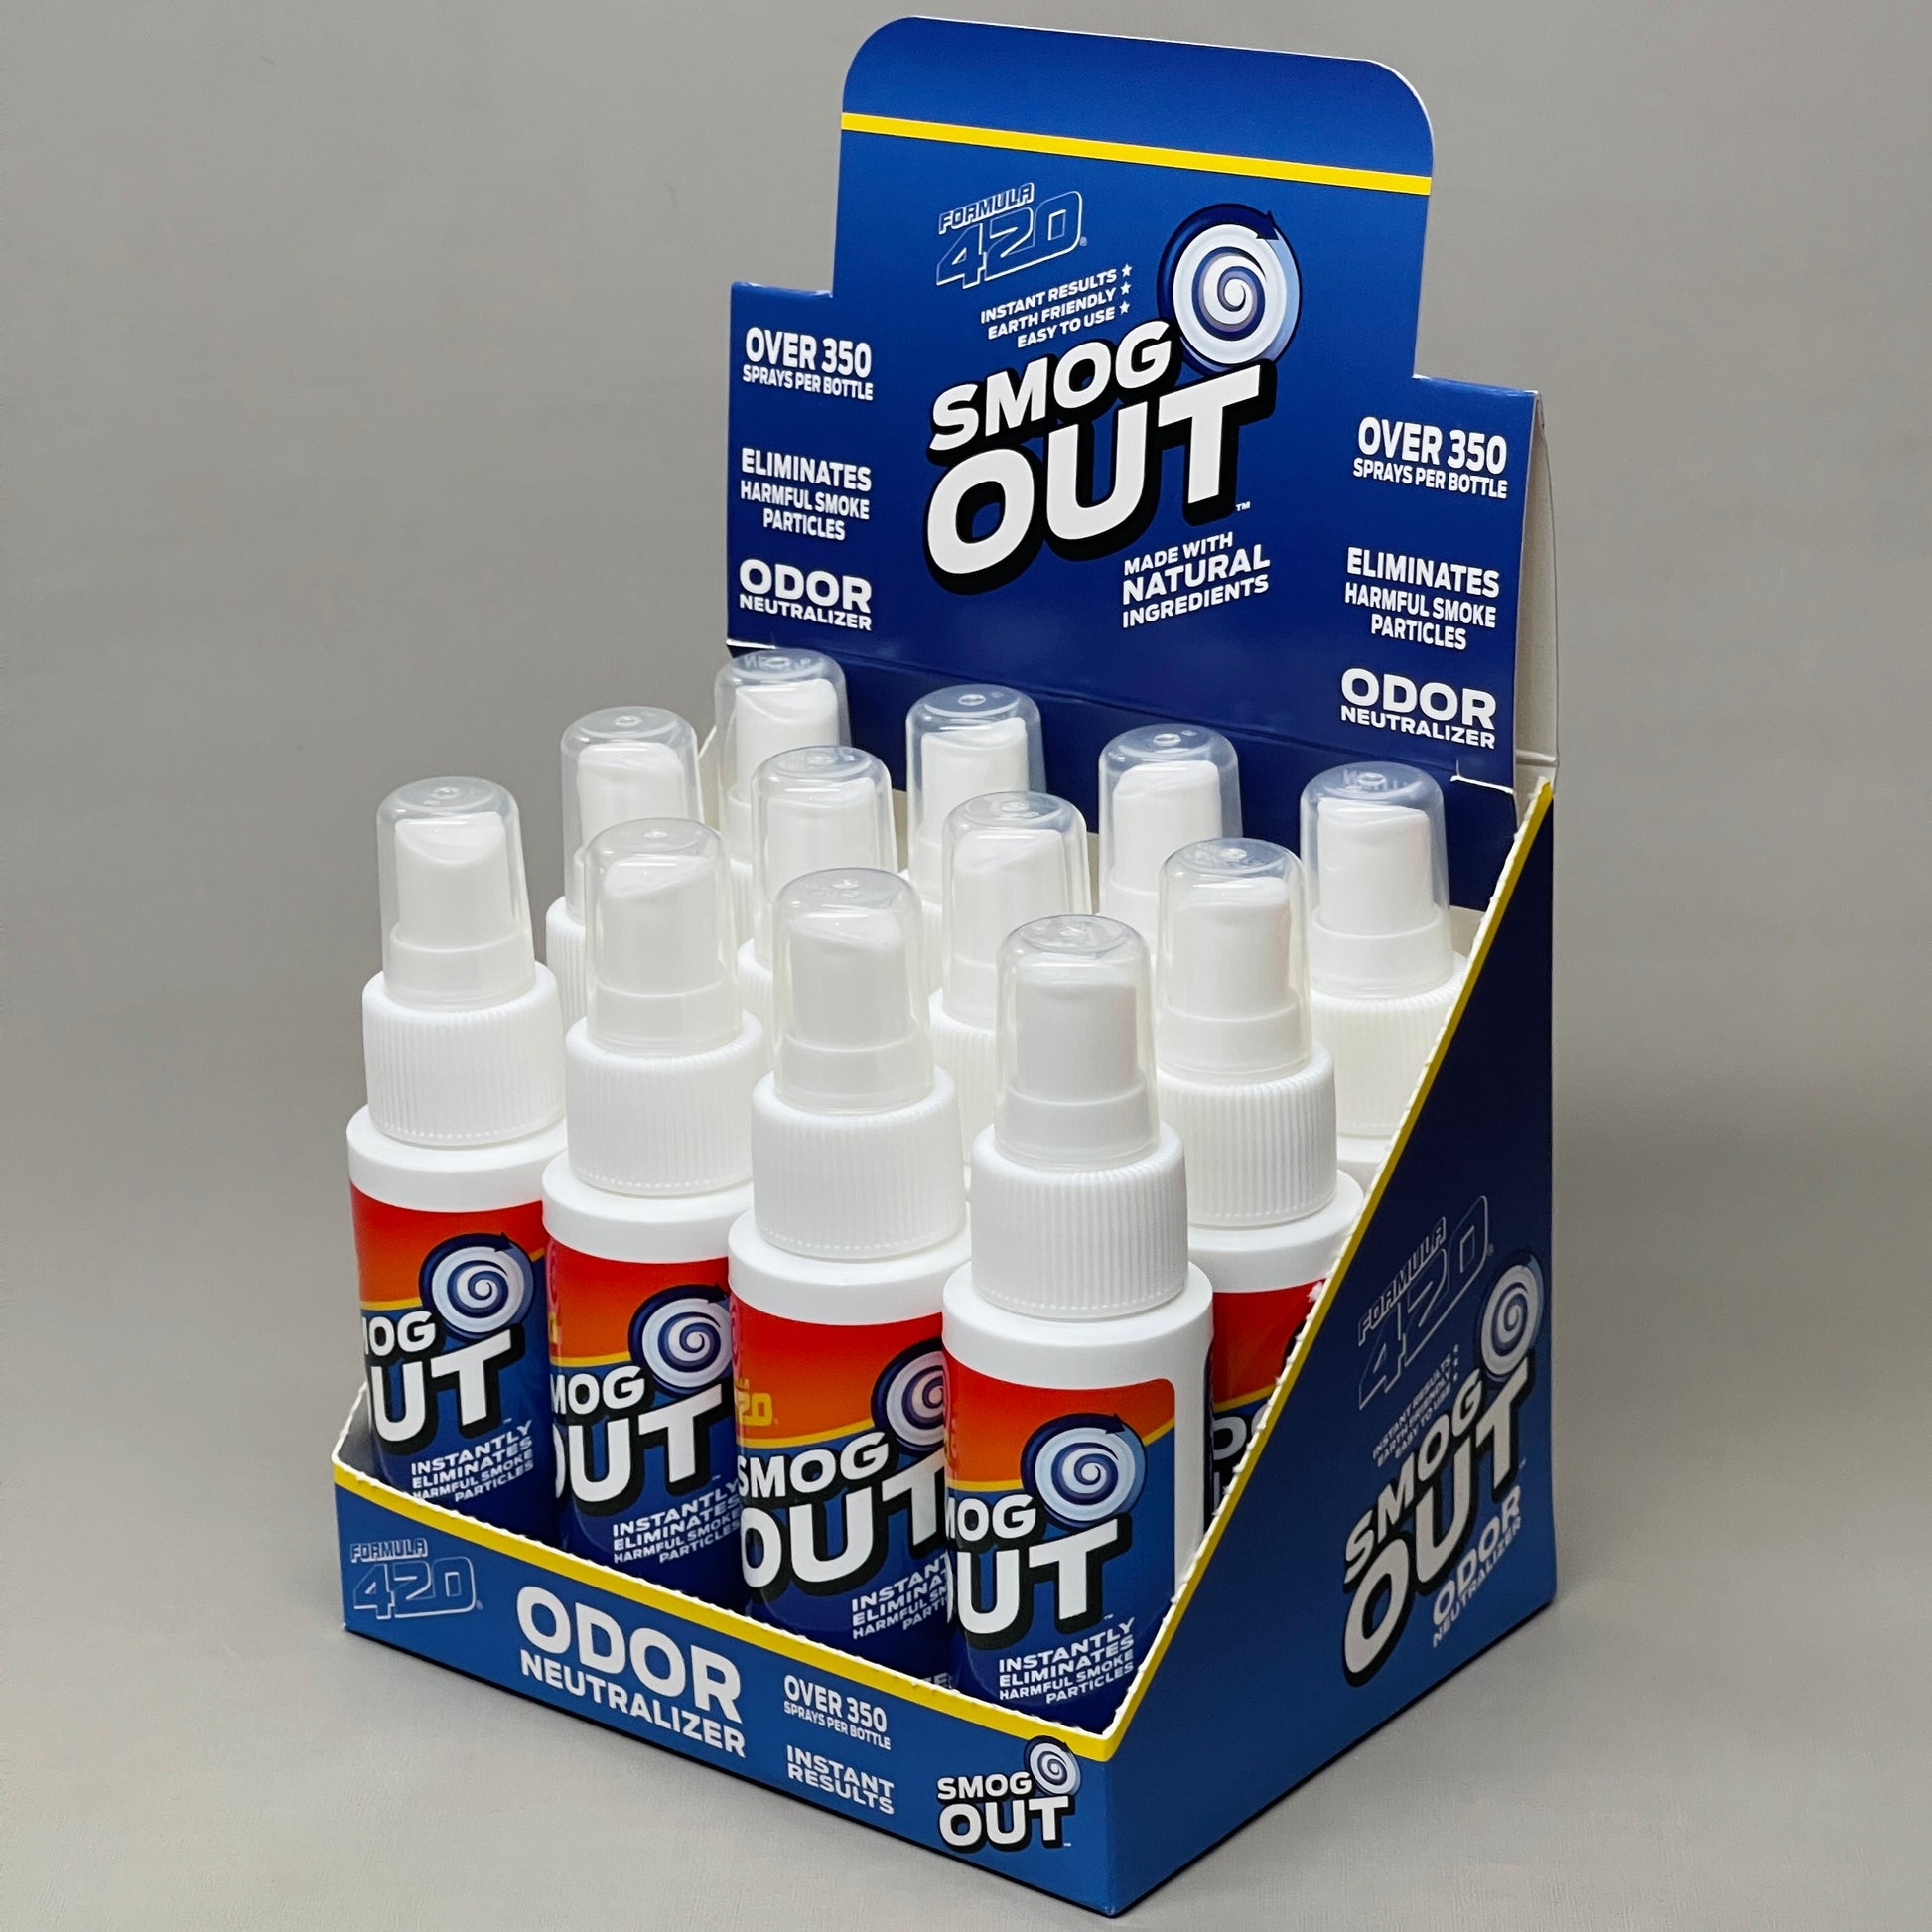 FORMULA 420 Smog-Out 12-Pack! Odor Neutralizer 2 oz (New) – PayWut